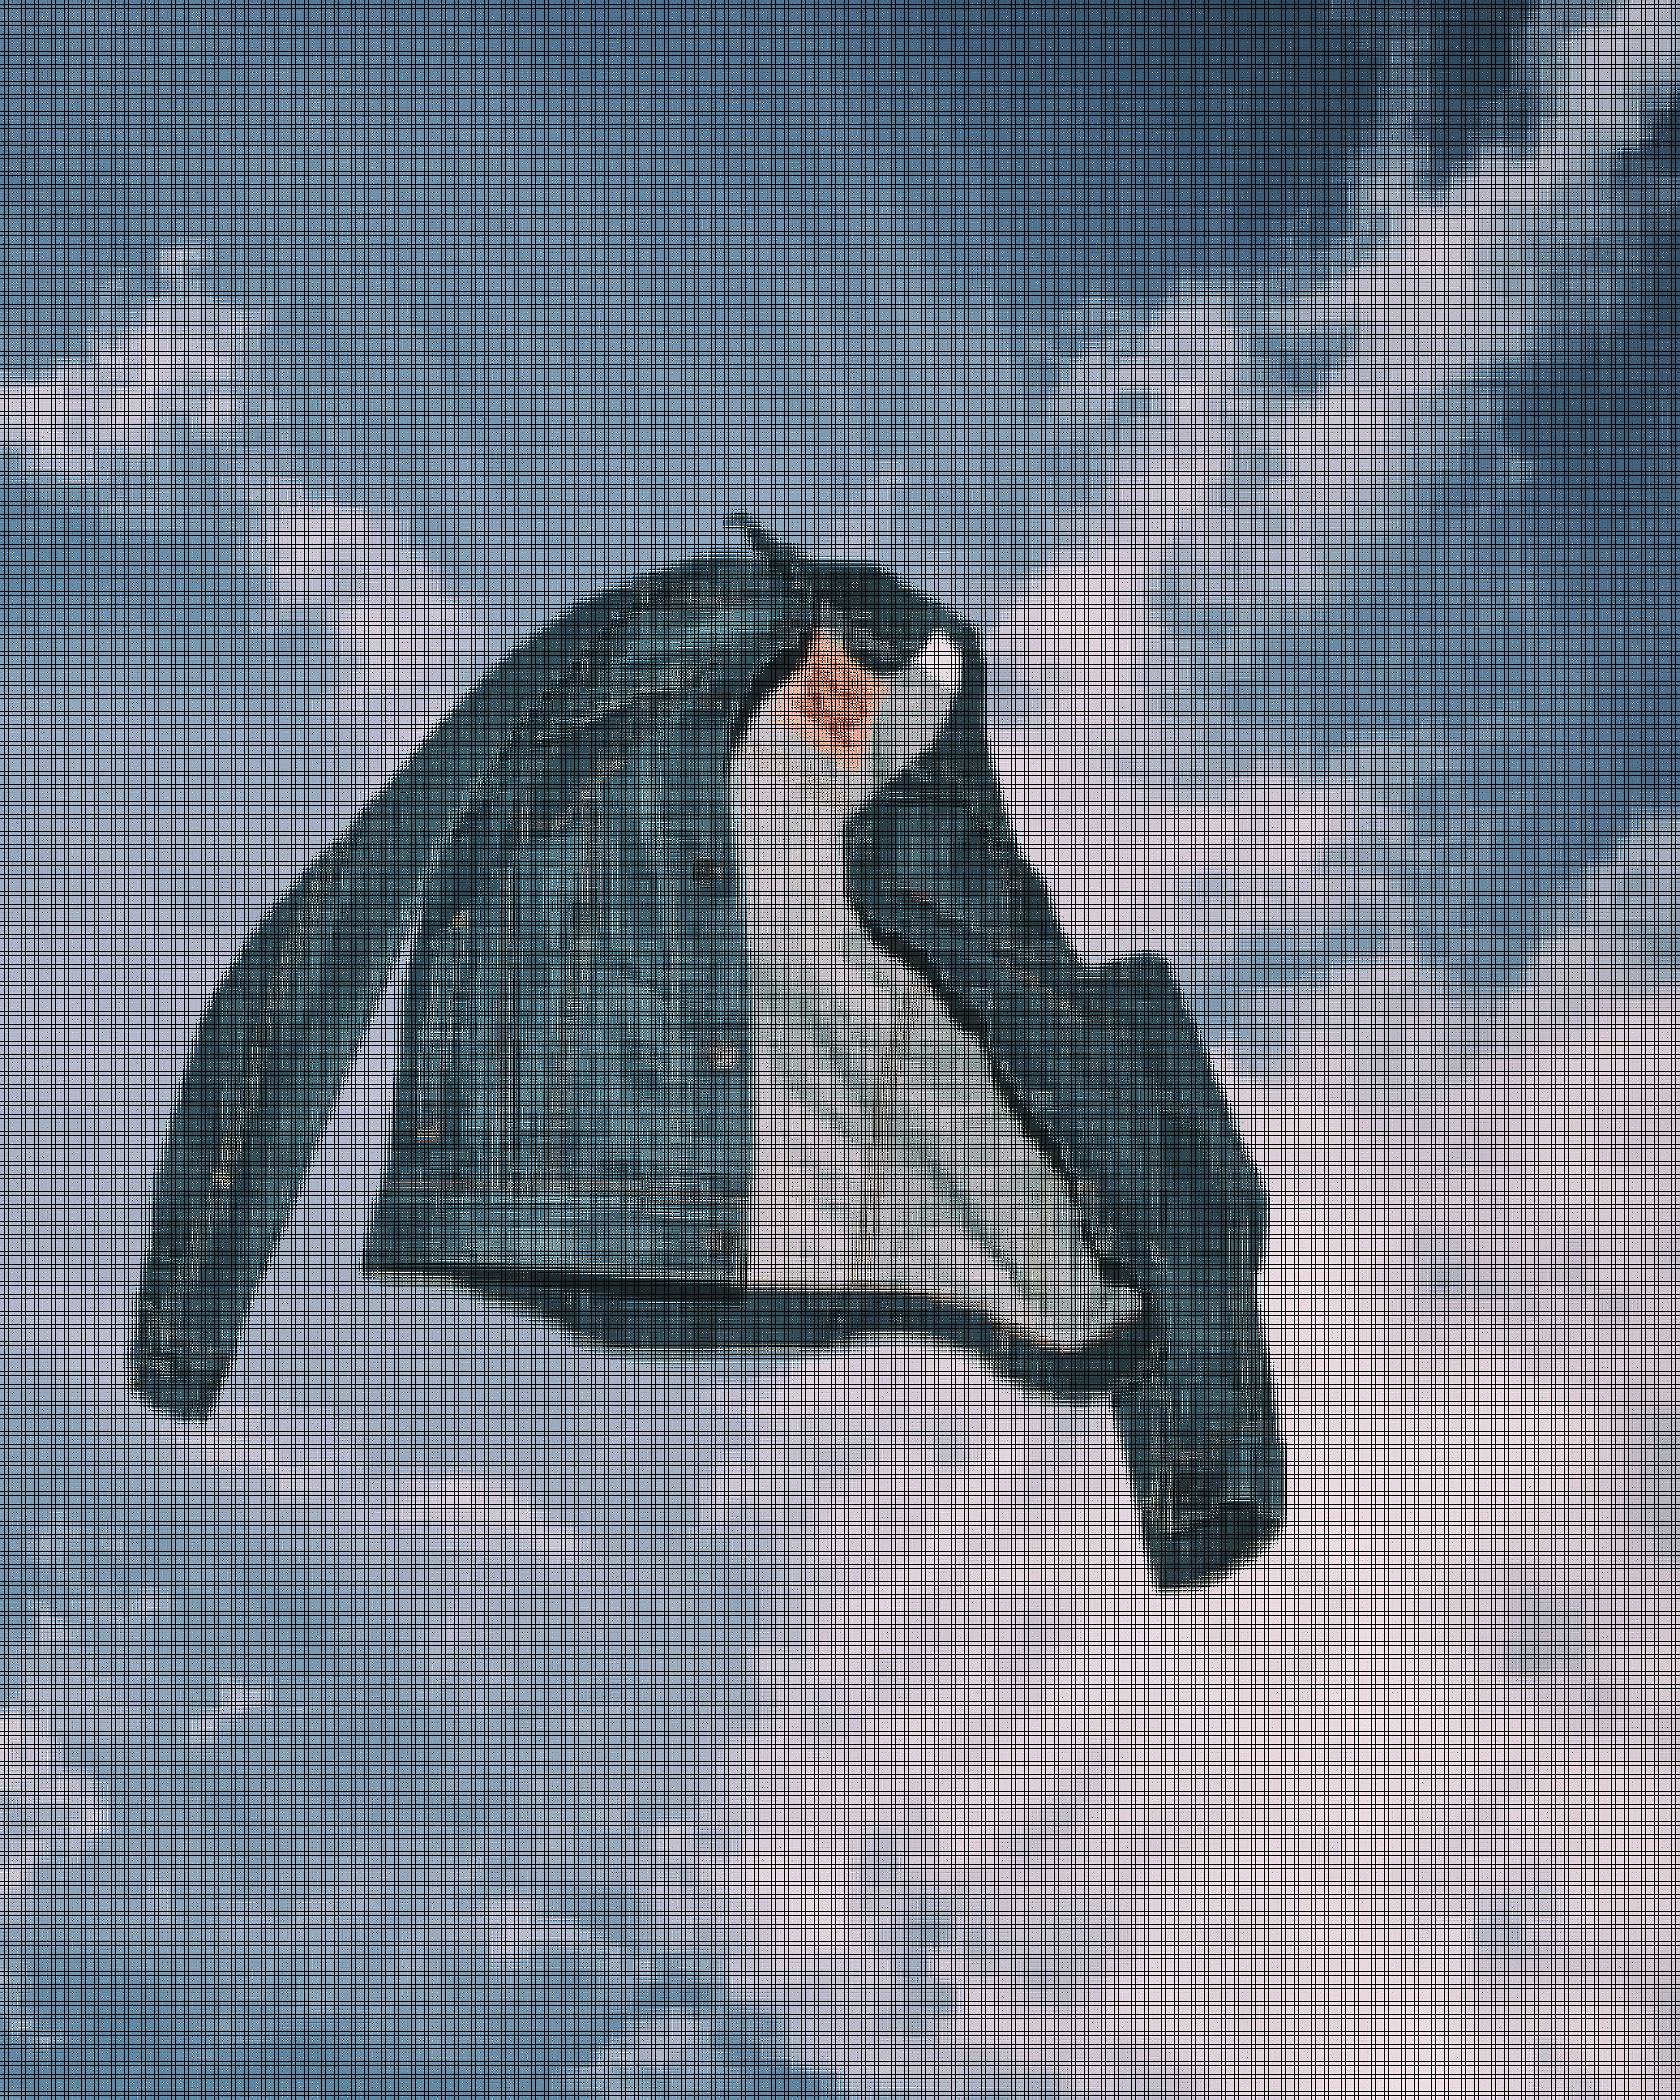 Levi's jacket in the air